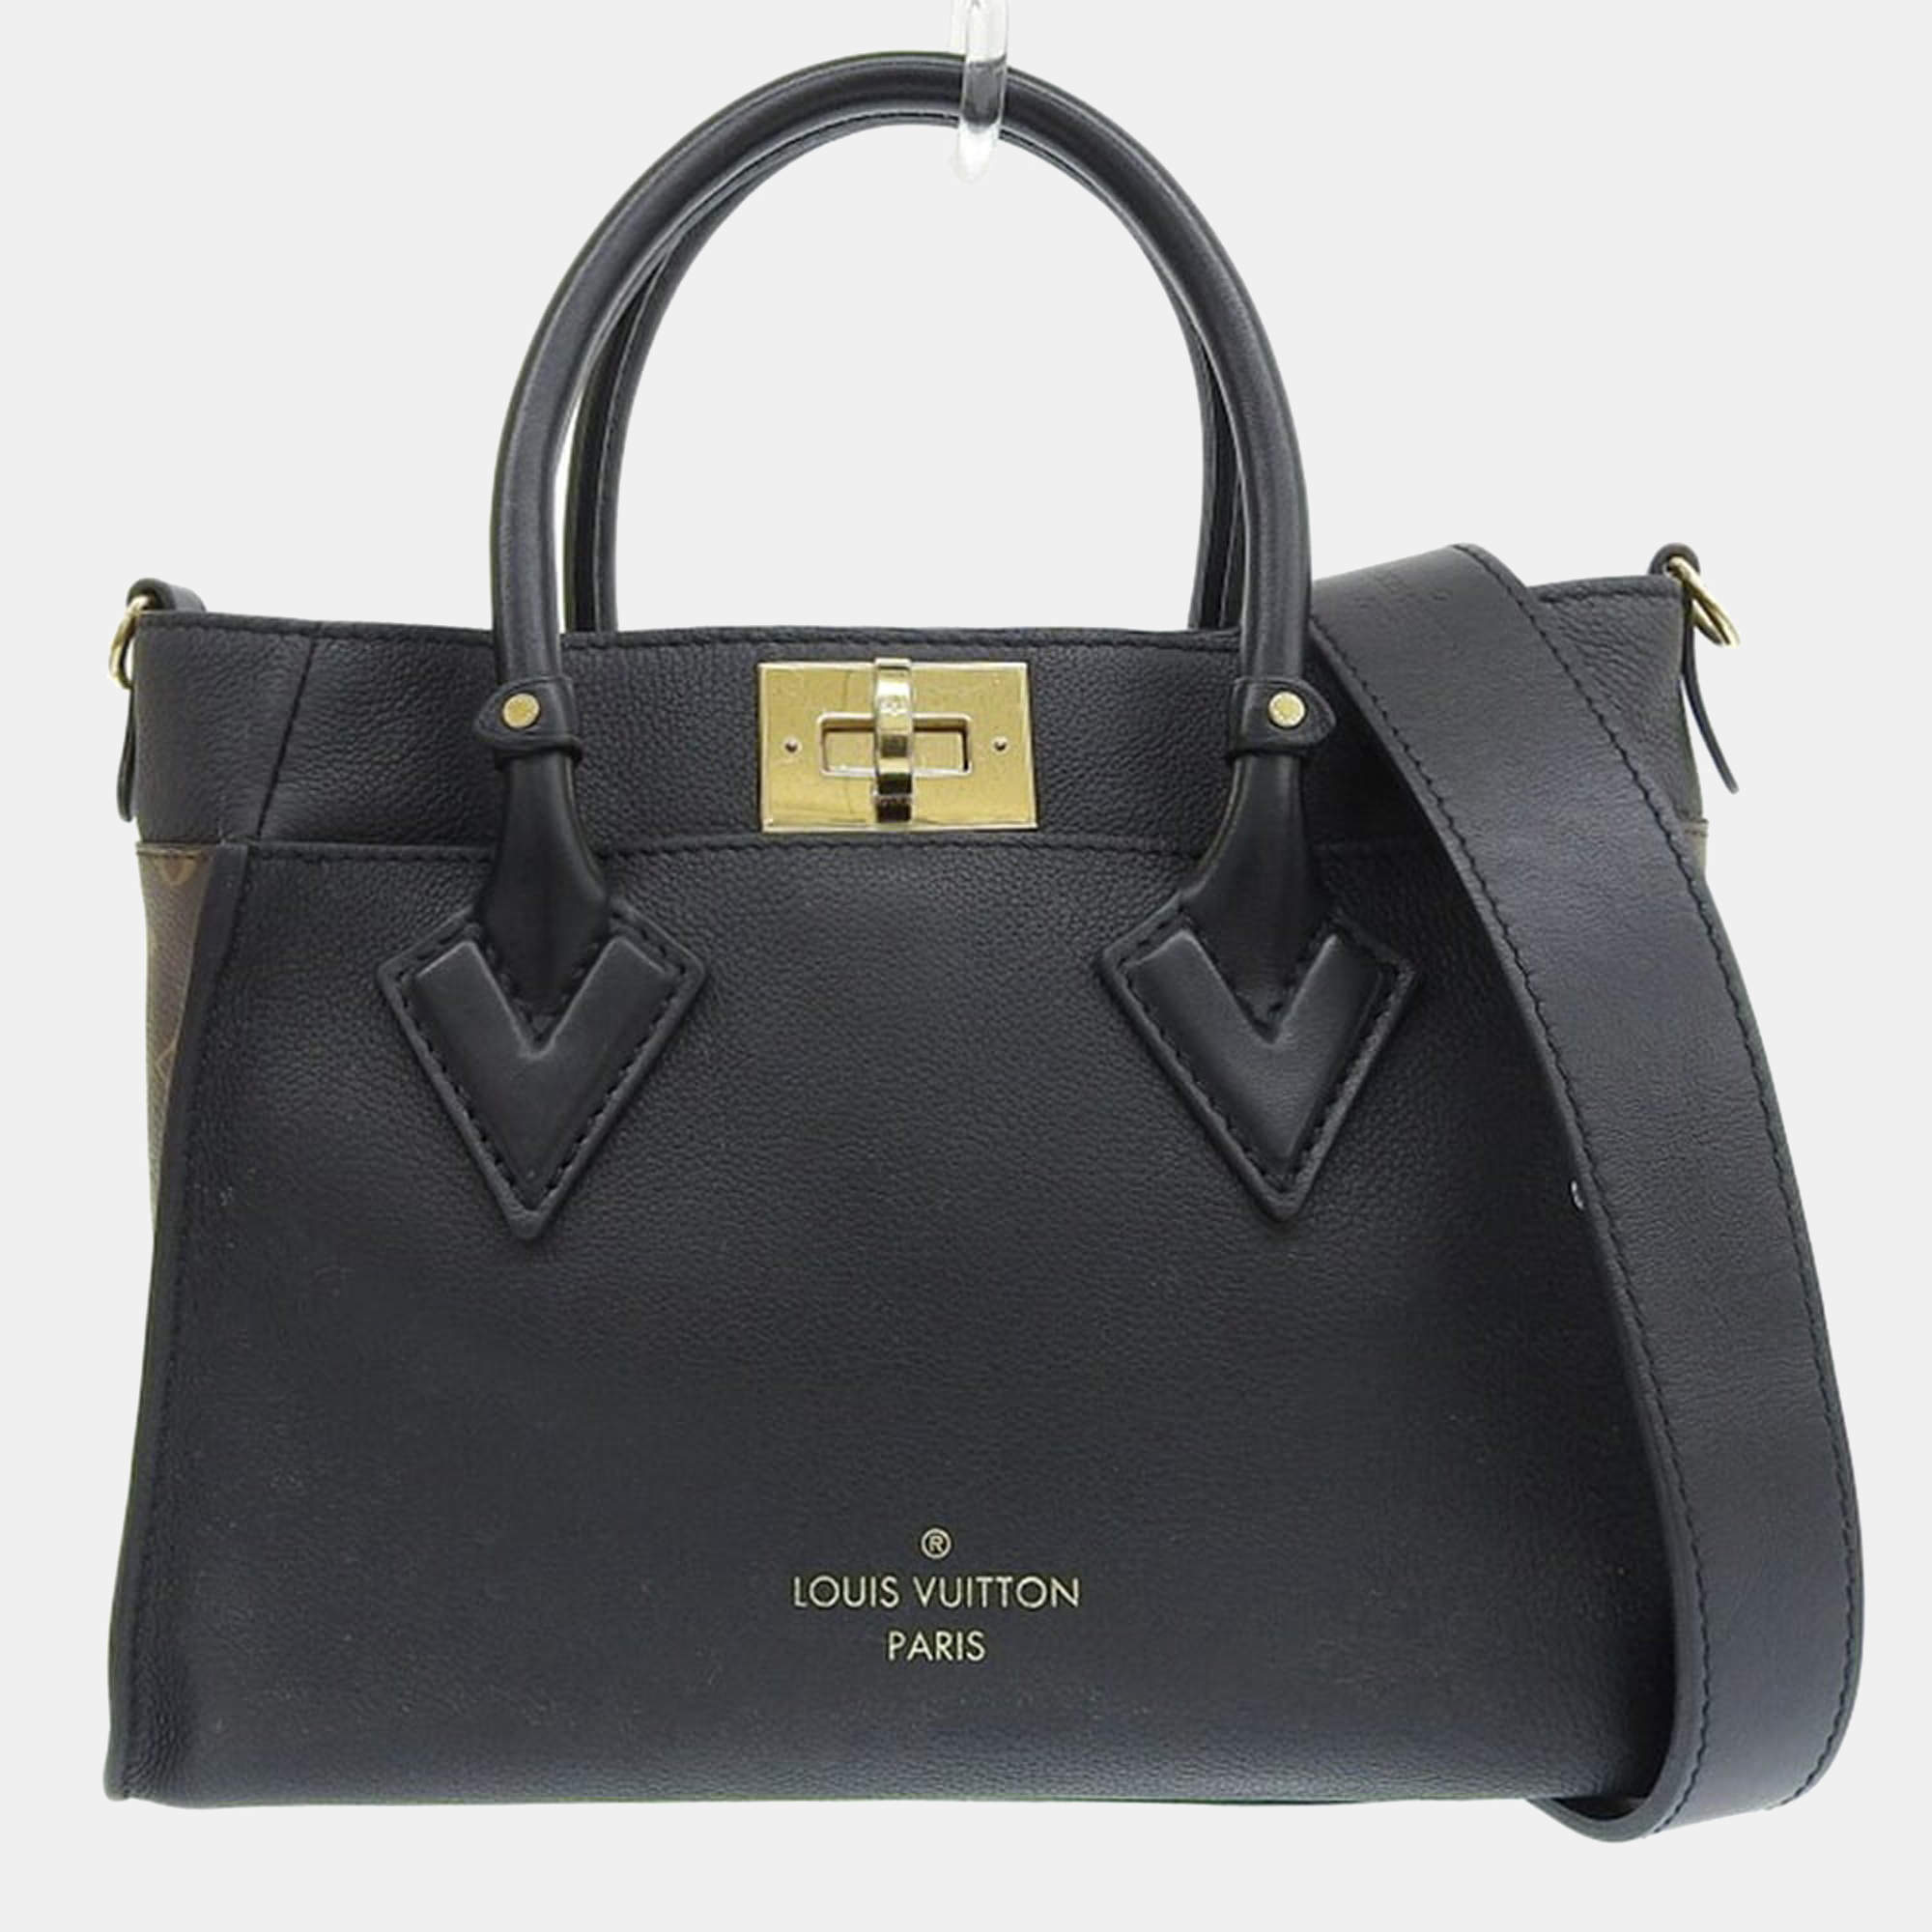 Louis Vuitton Black Leather and Monogram On My Side PM Tote Bag